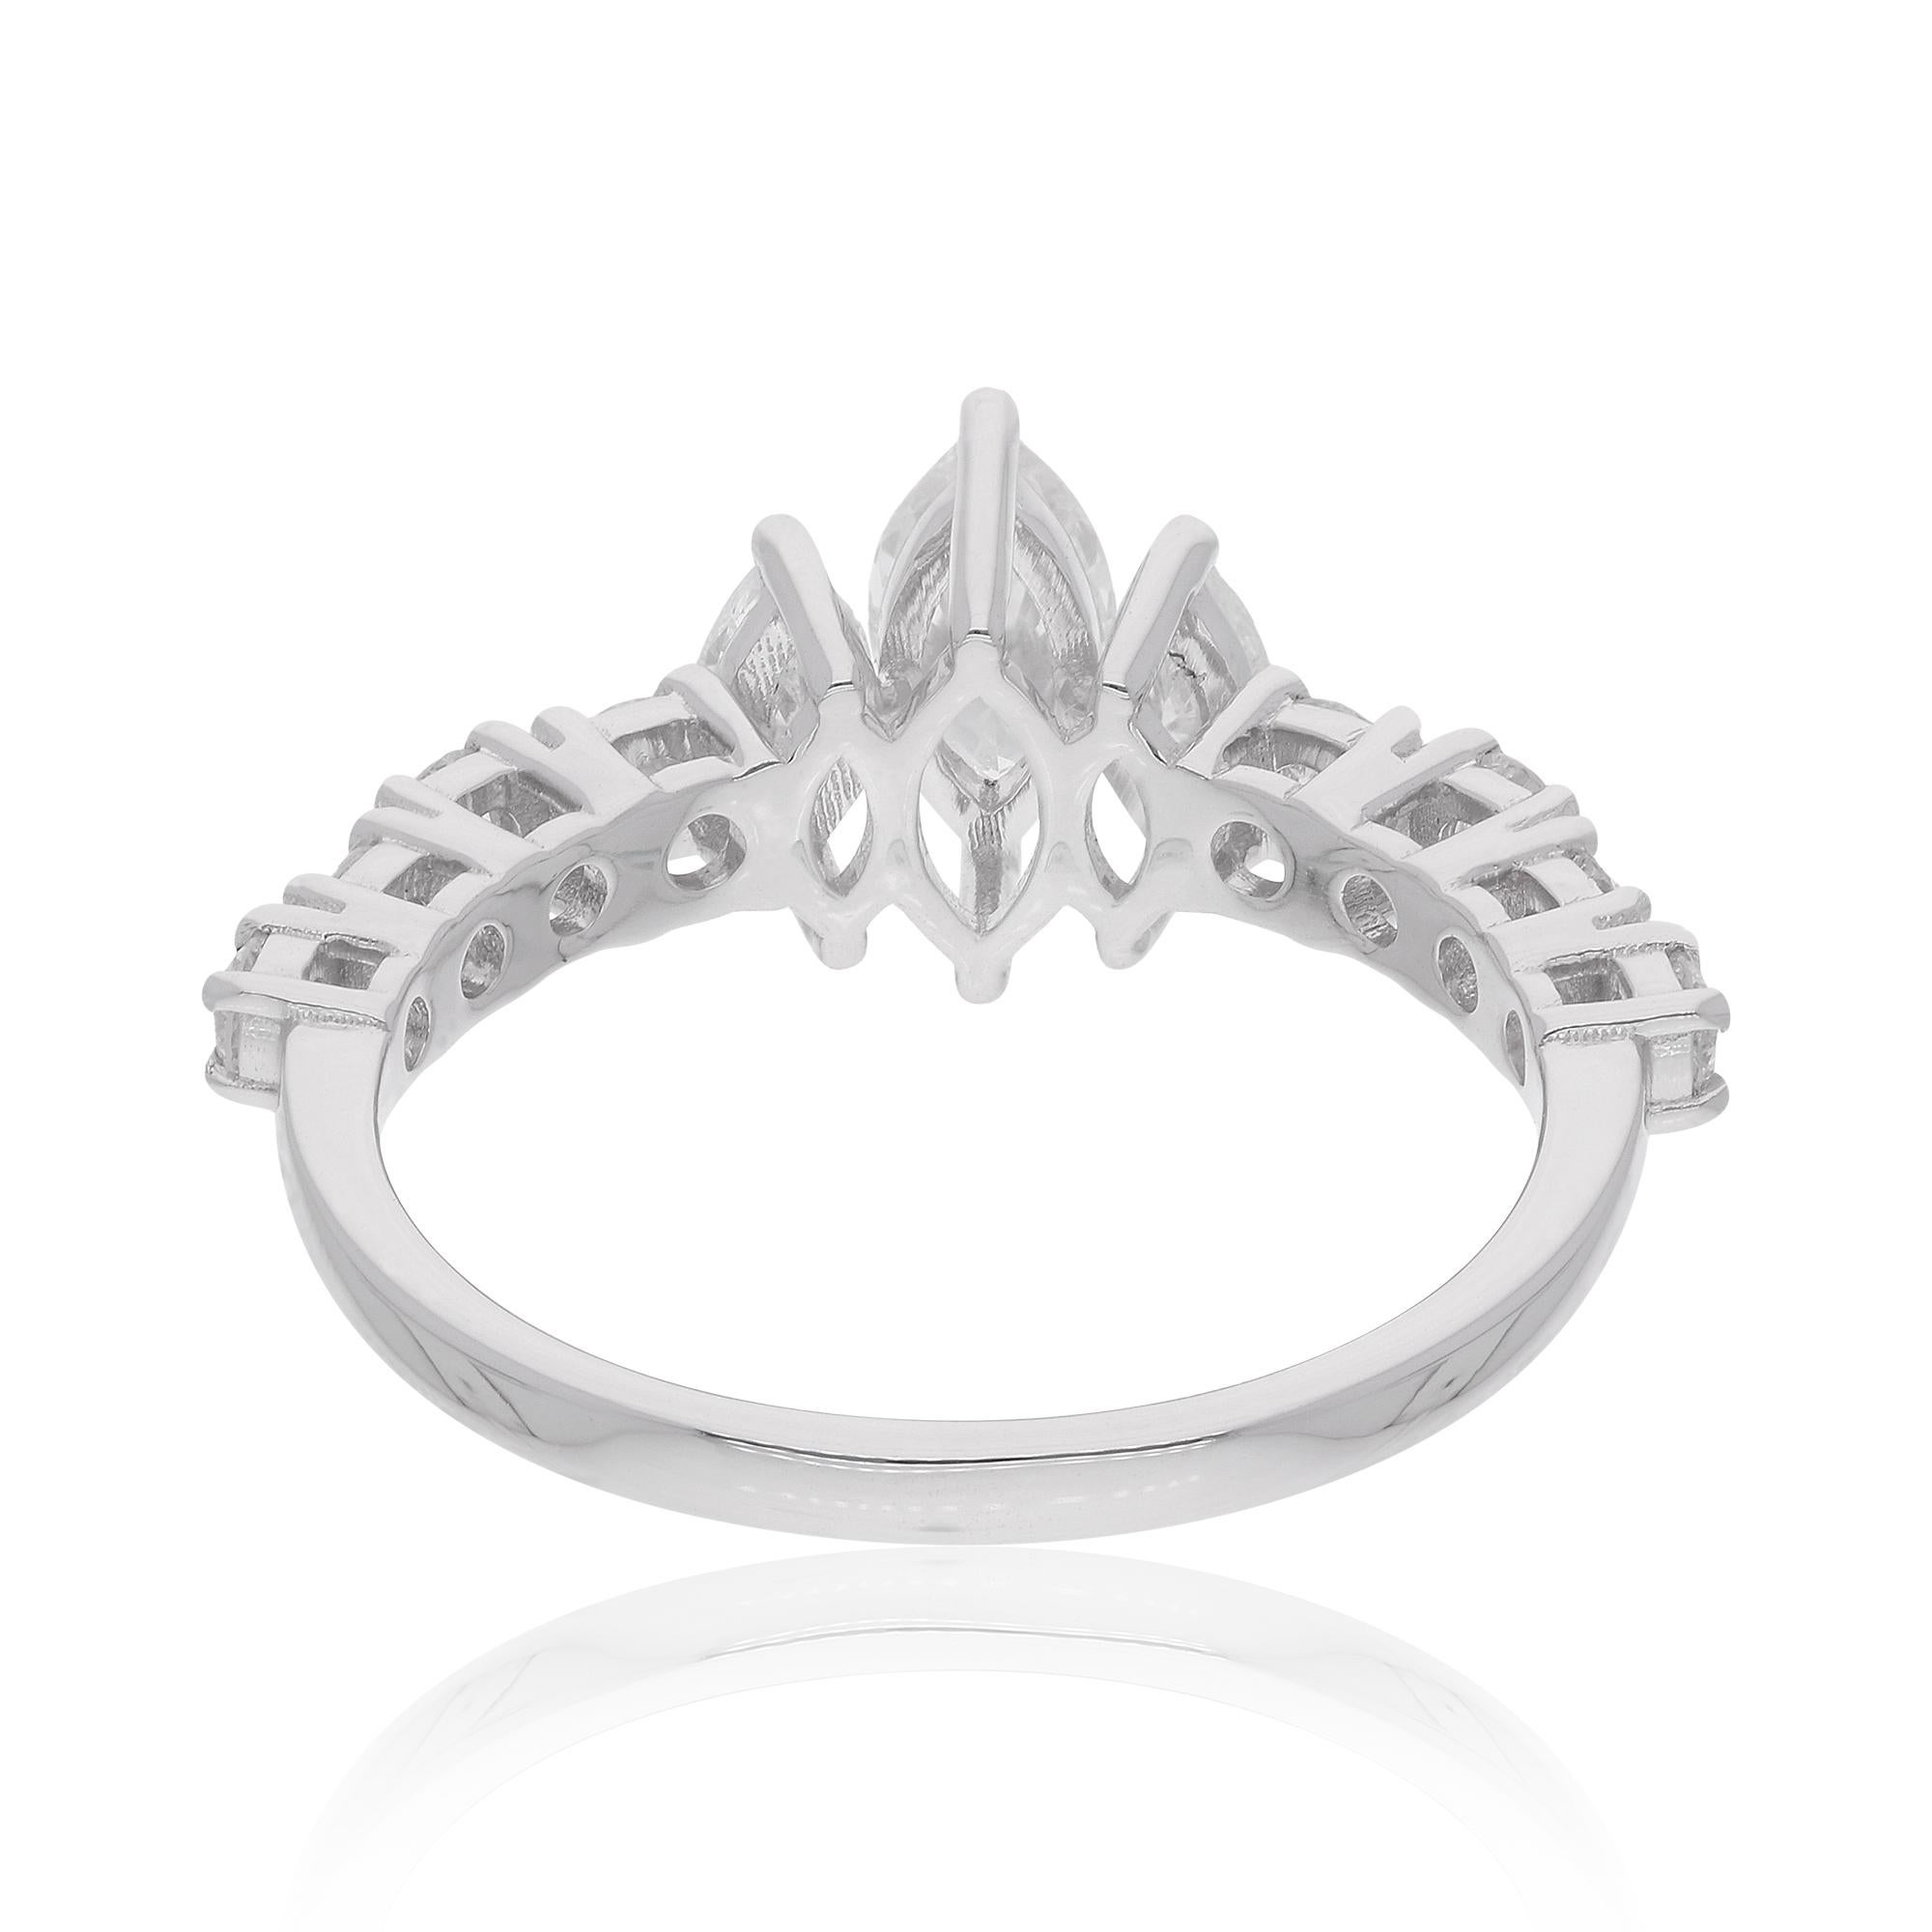 A handmade ring featuring a 1.02 carat marquise and round diamonds in 14 karat white gold is a beautiful and unique piece of fine jewelry. The ring typically showcases a combination of a marquise-shaped diamond and round diamonds.

Item Code :-